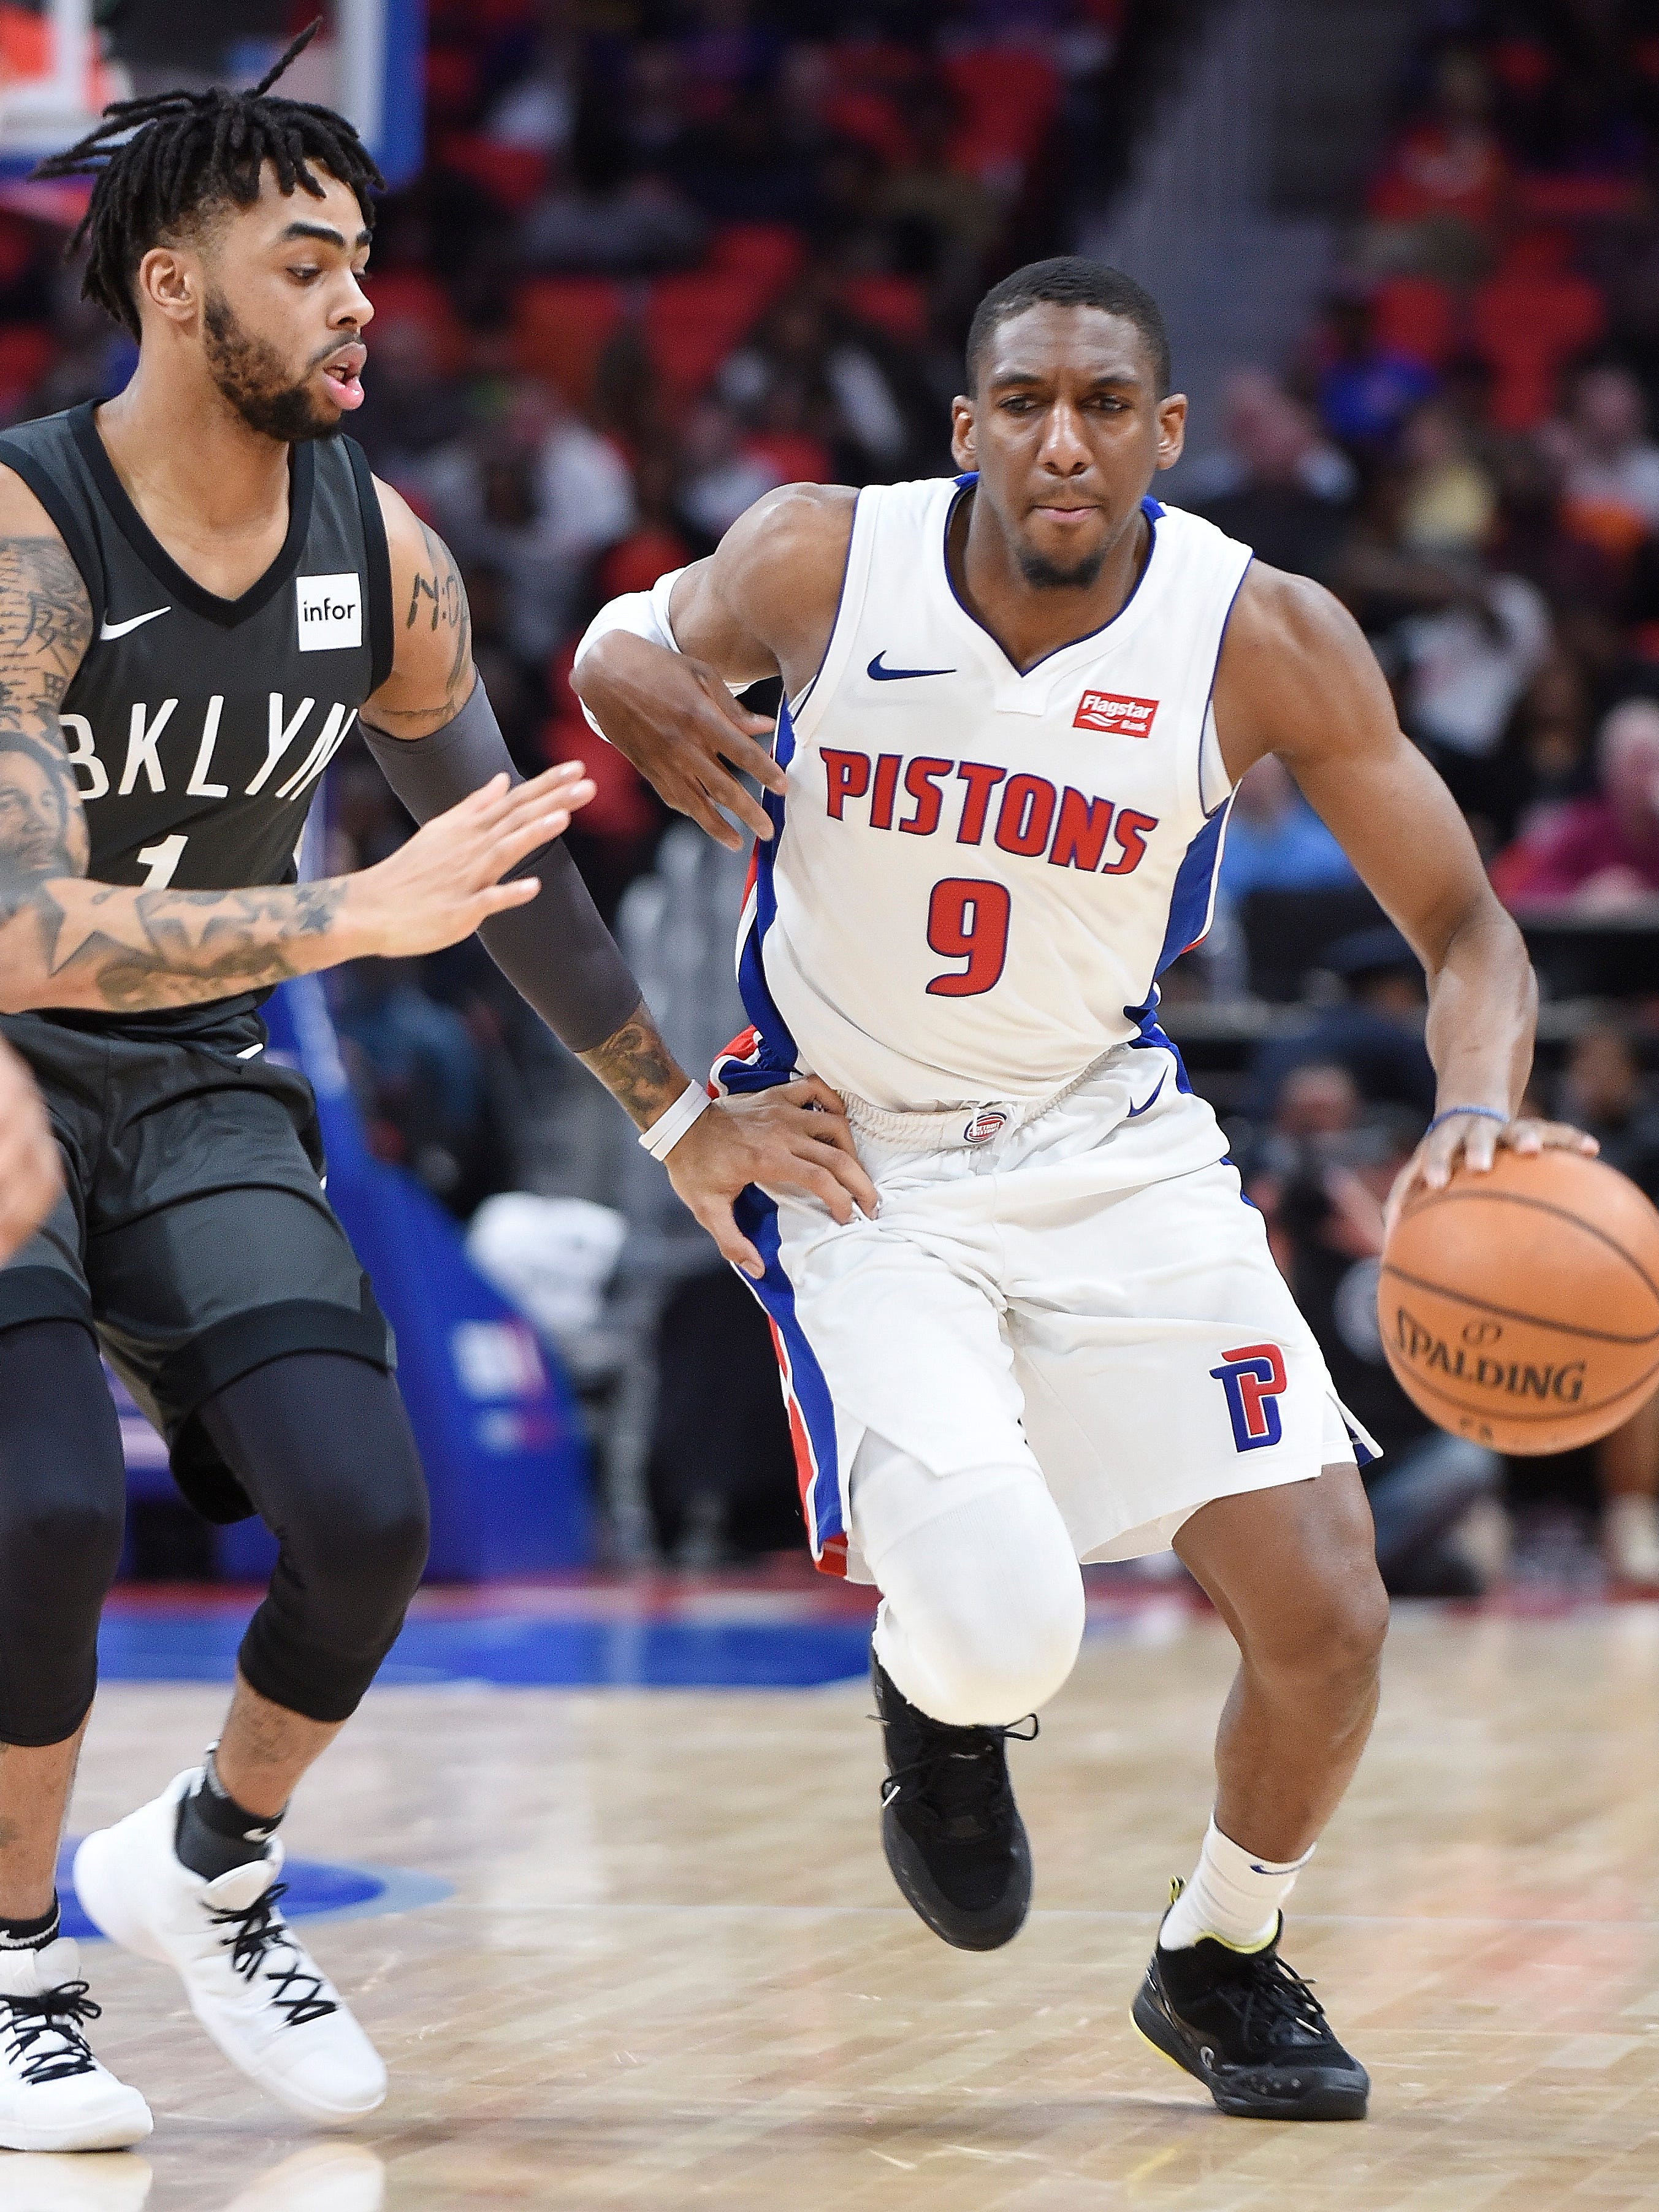 Pistons' Langston Galloway drives past Nets' D' Angelo Russell in the third quarter.